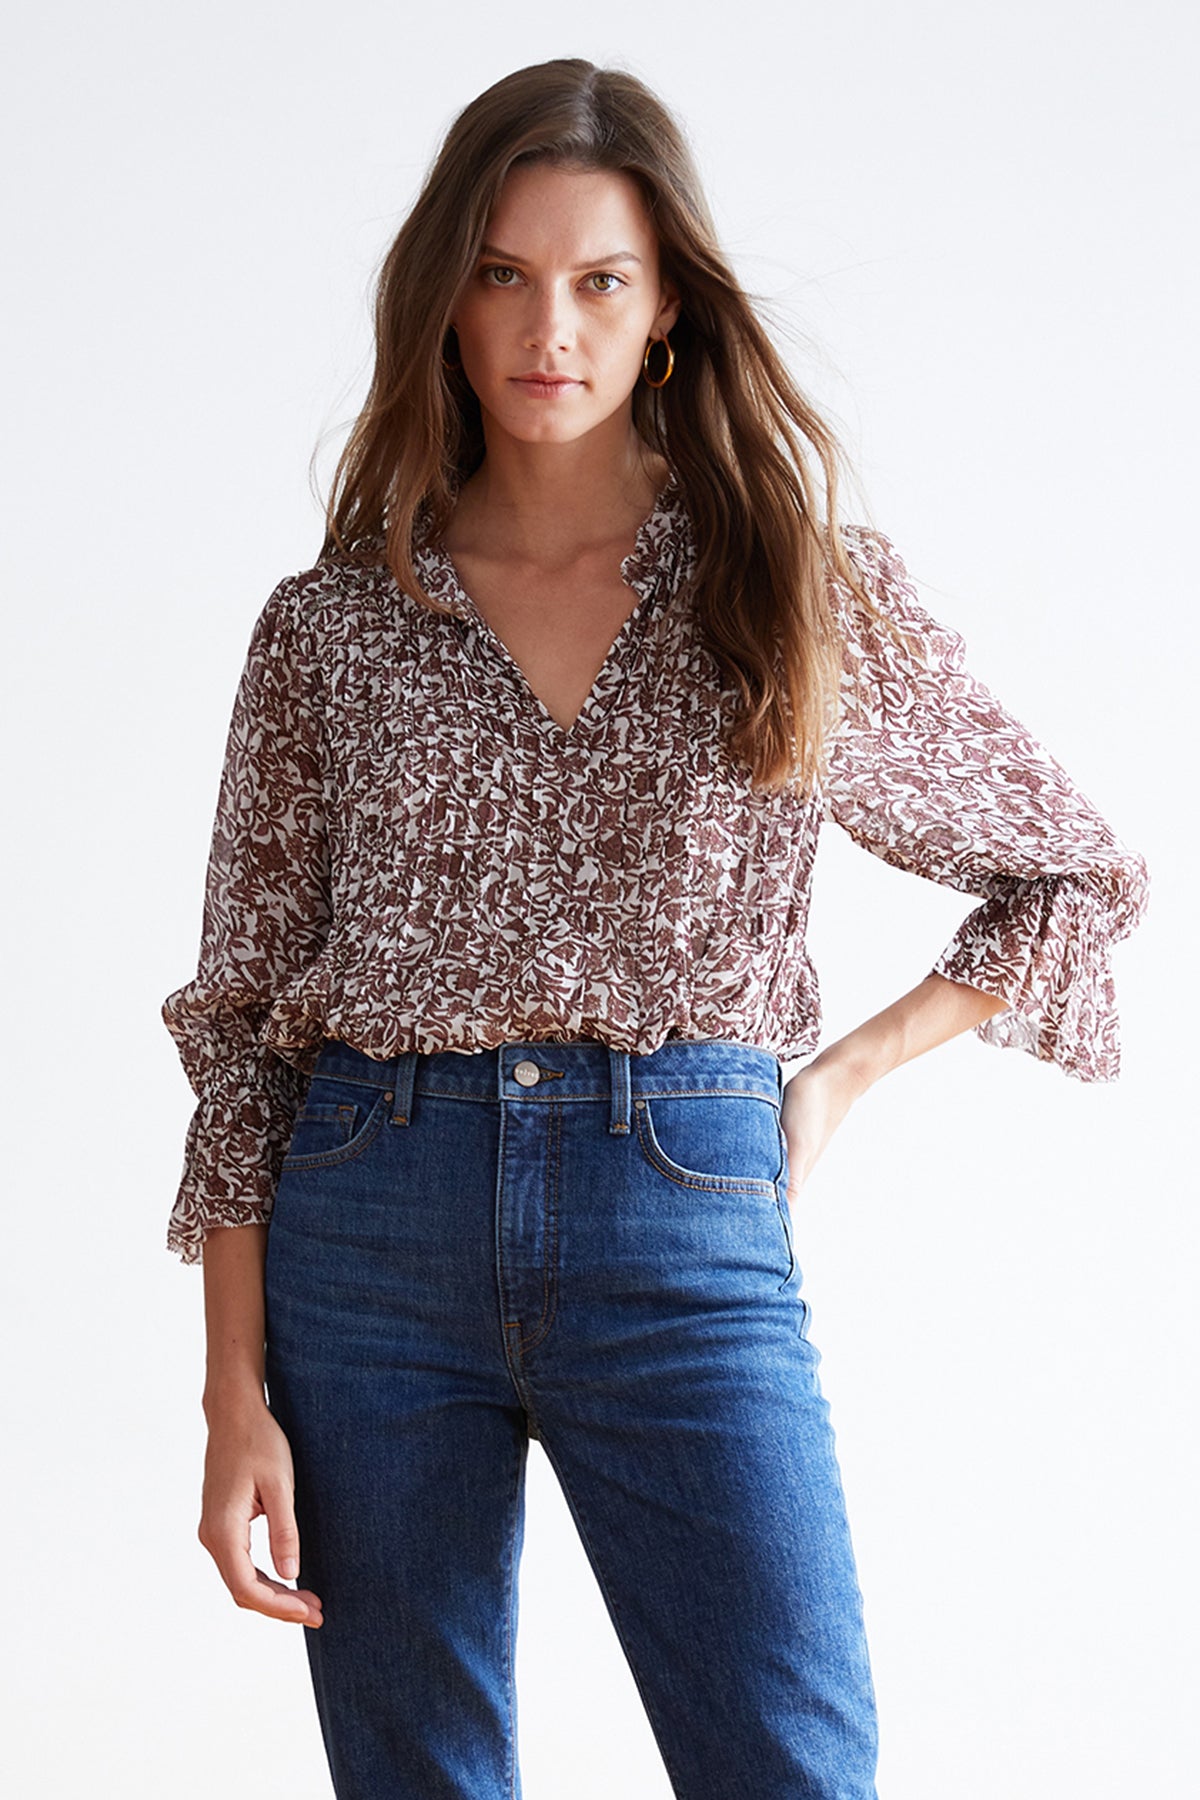 A woman with long hair wearing a Velvet by Graham & Spencer's WILONA PRINTED RUFFLE BLOUSE and blue jeans, standing against a plain white background.-7755171496017